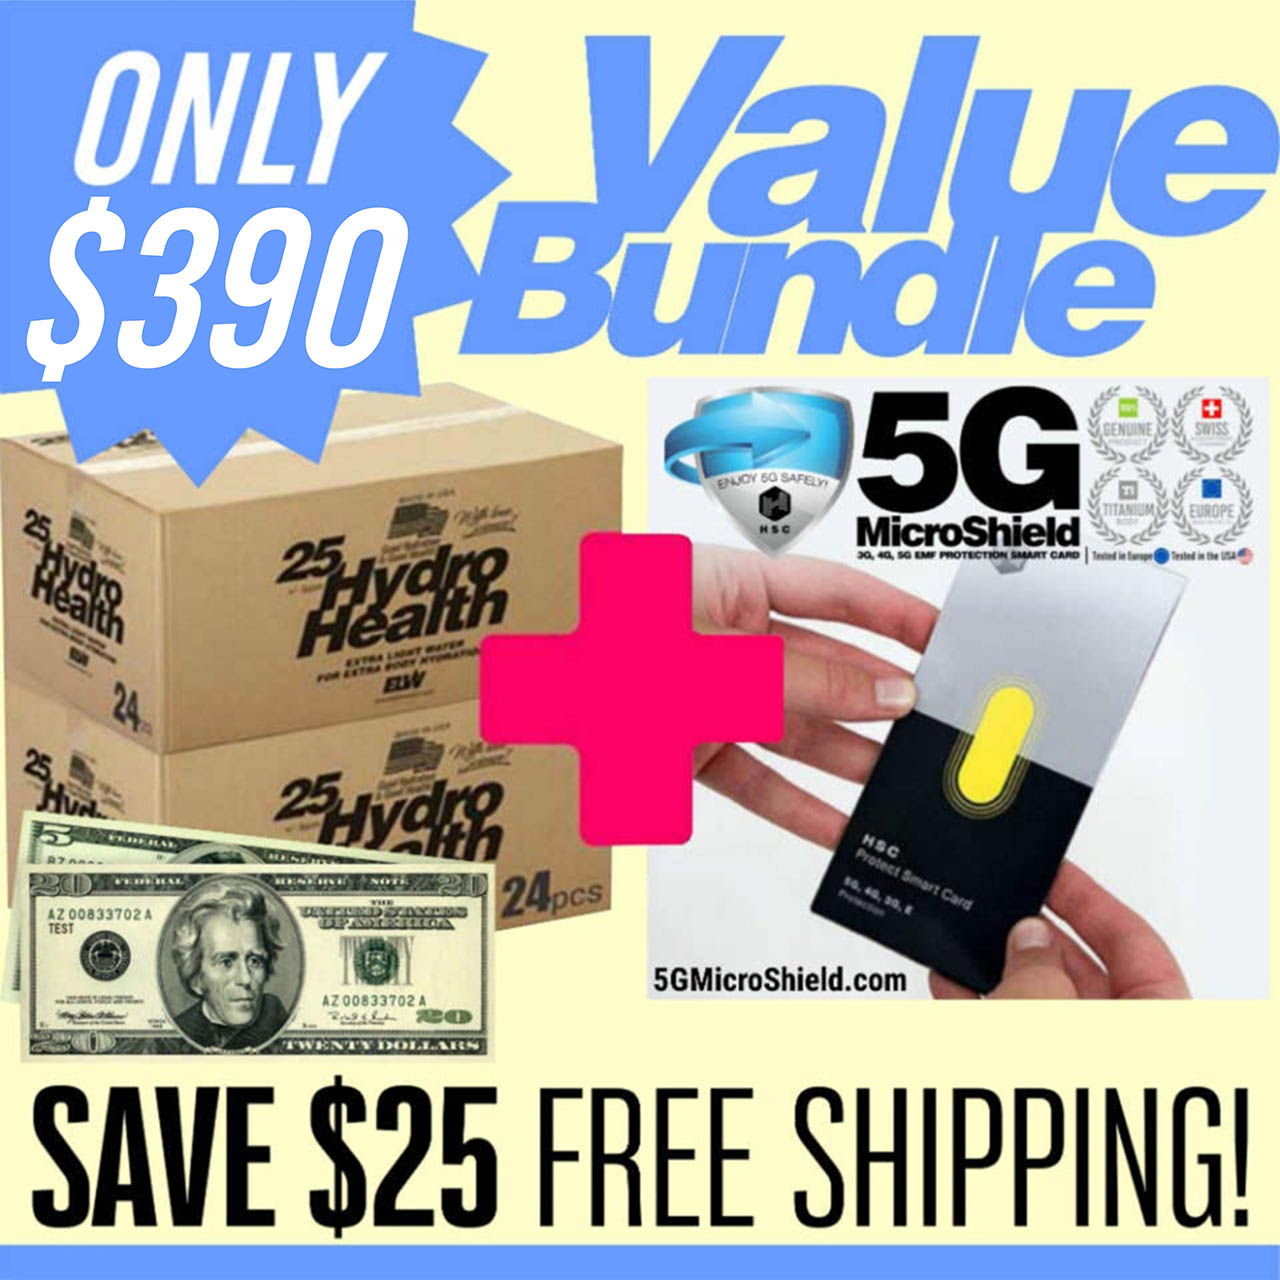 25 ppm DDW bundle (2 cases-48 bottles-500 ML each ) +one 3G,4G,5G  protection card for $395, you save $32-free delivery